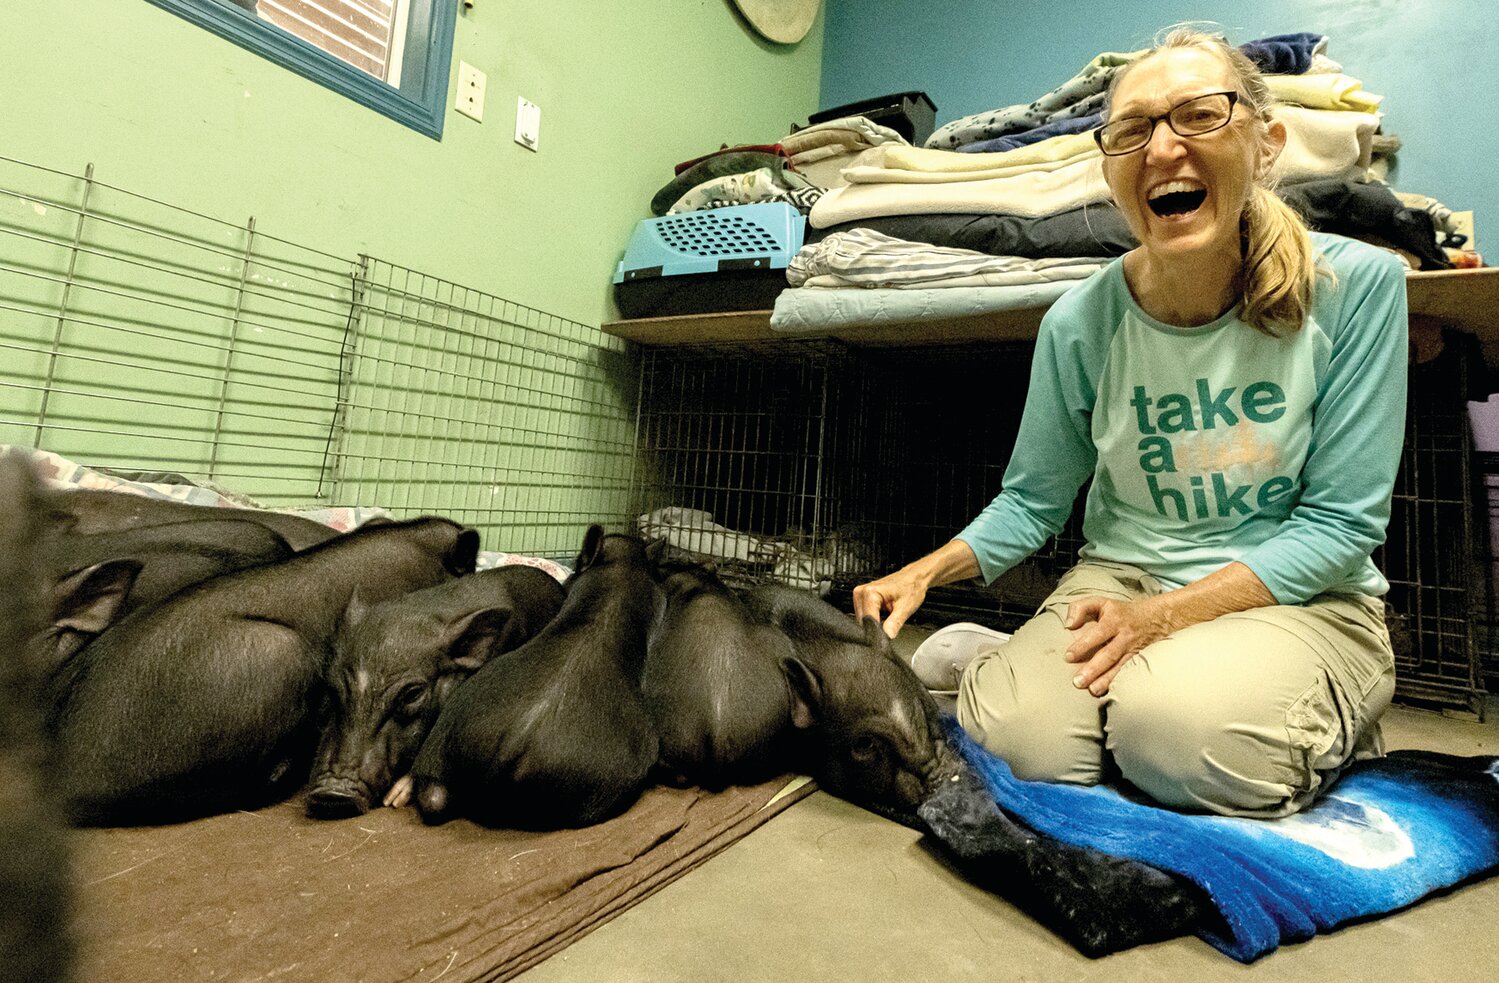 Sheryl Slopey cares for a group of piglets rescued from a home, where the owner’s intention was to feed them to a pet snake. Today, they wait for adoption and a “forever” home.